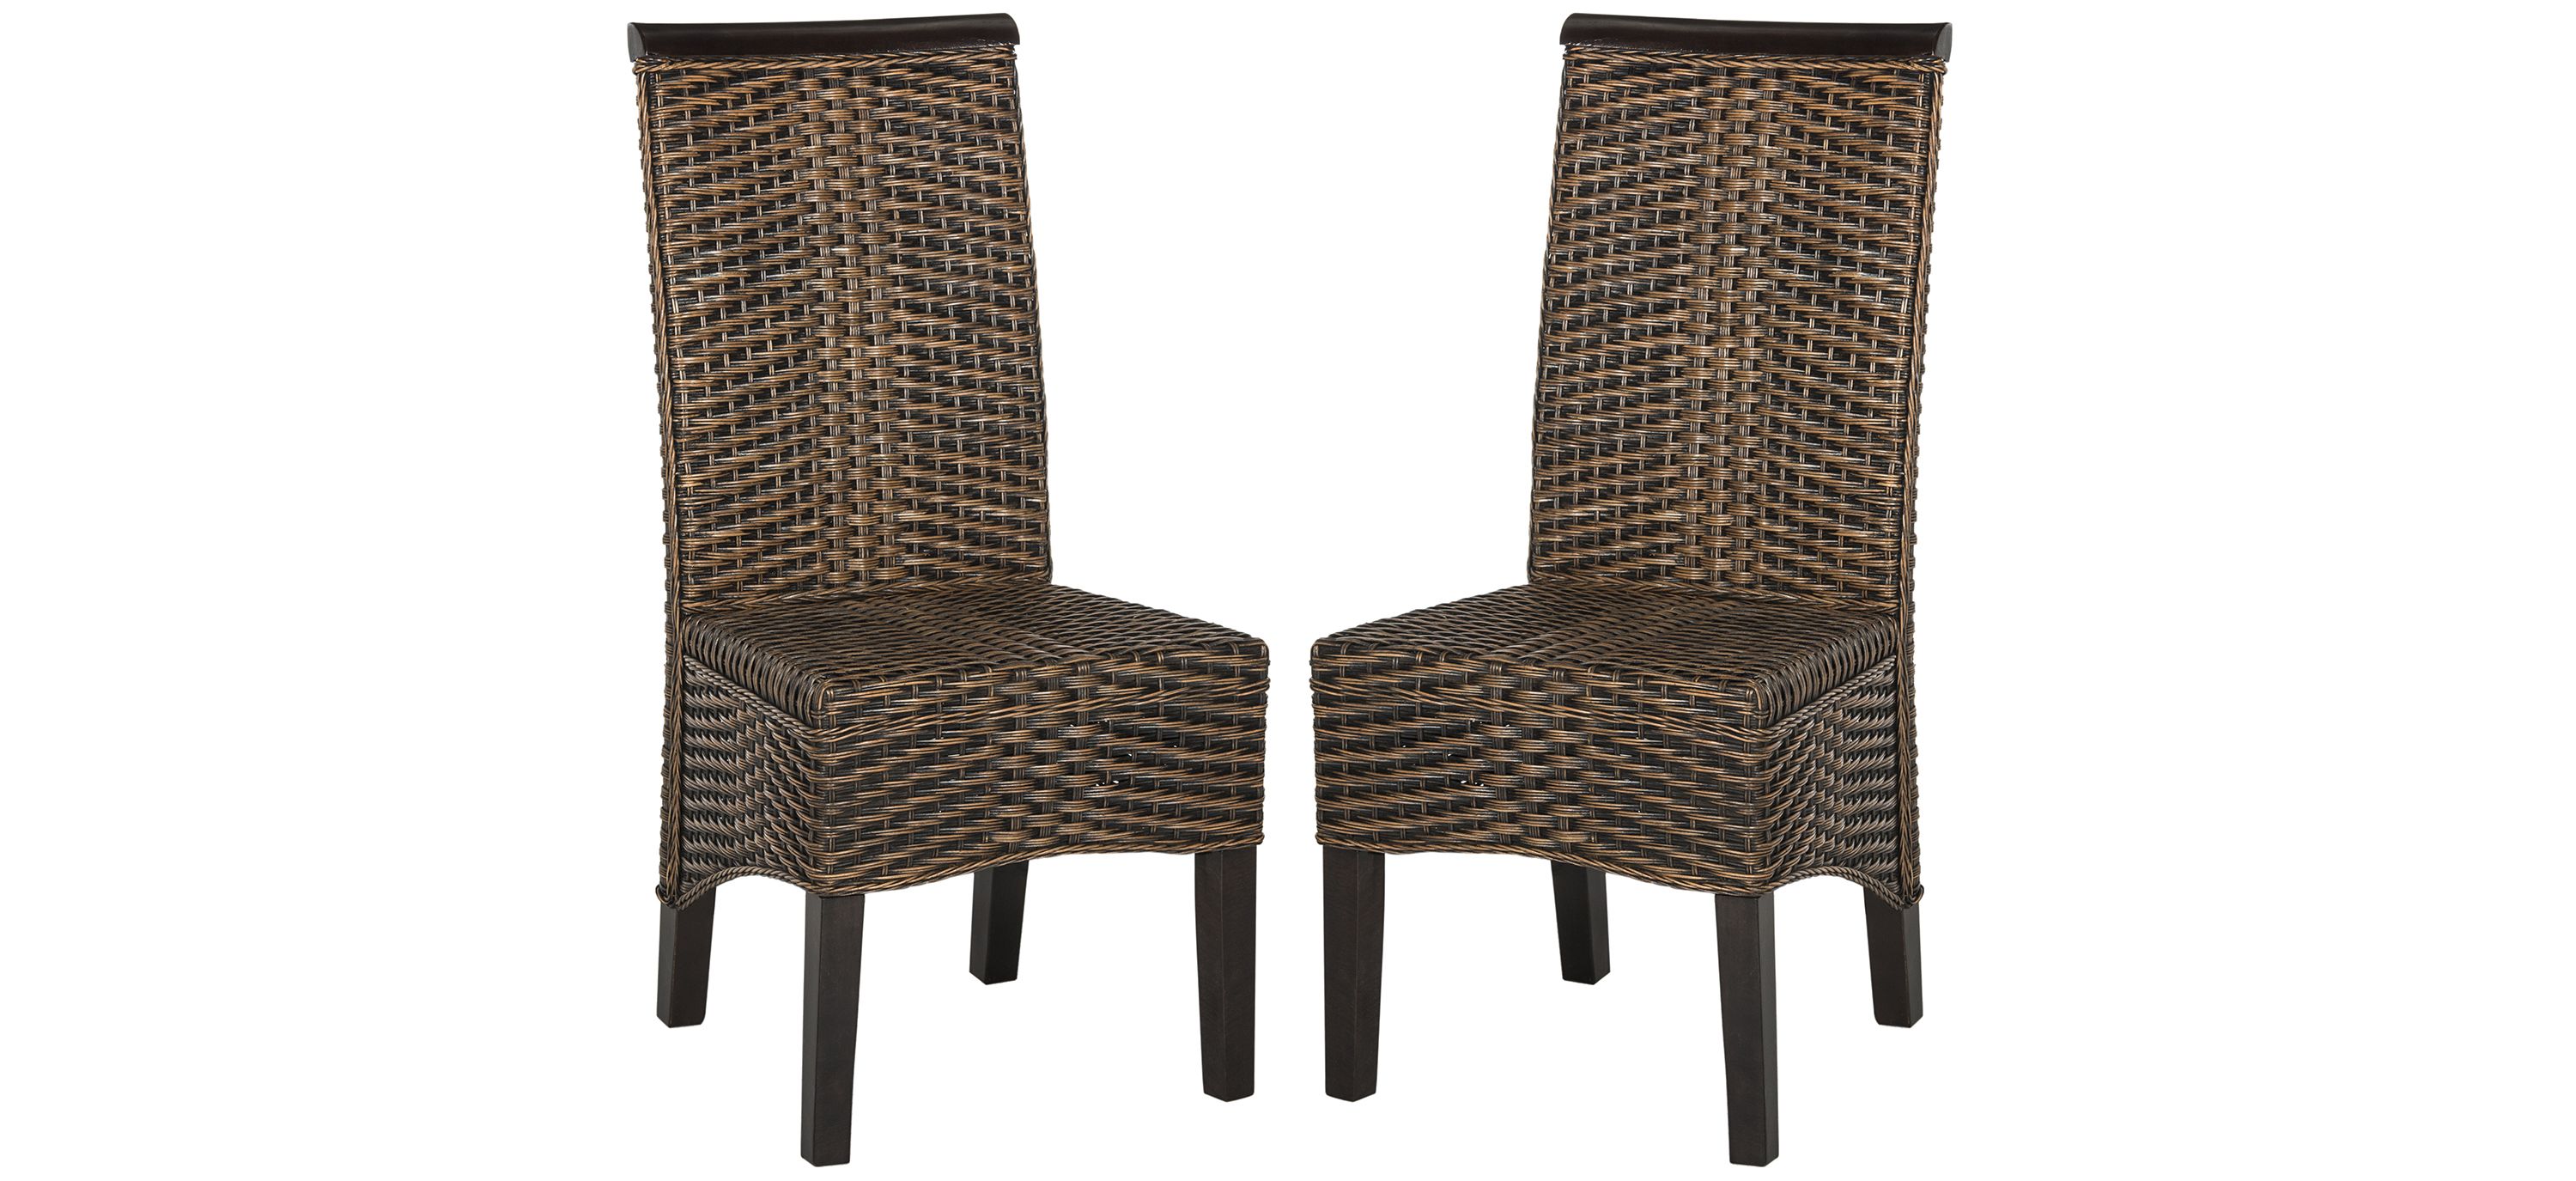 Ember Wicker Dining Chair - Set of 2